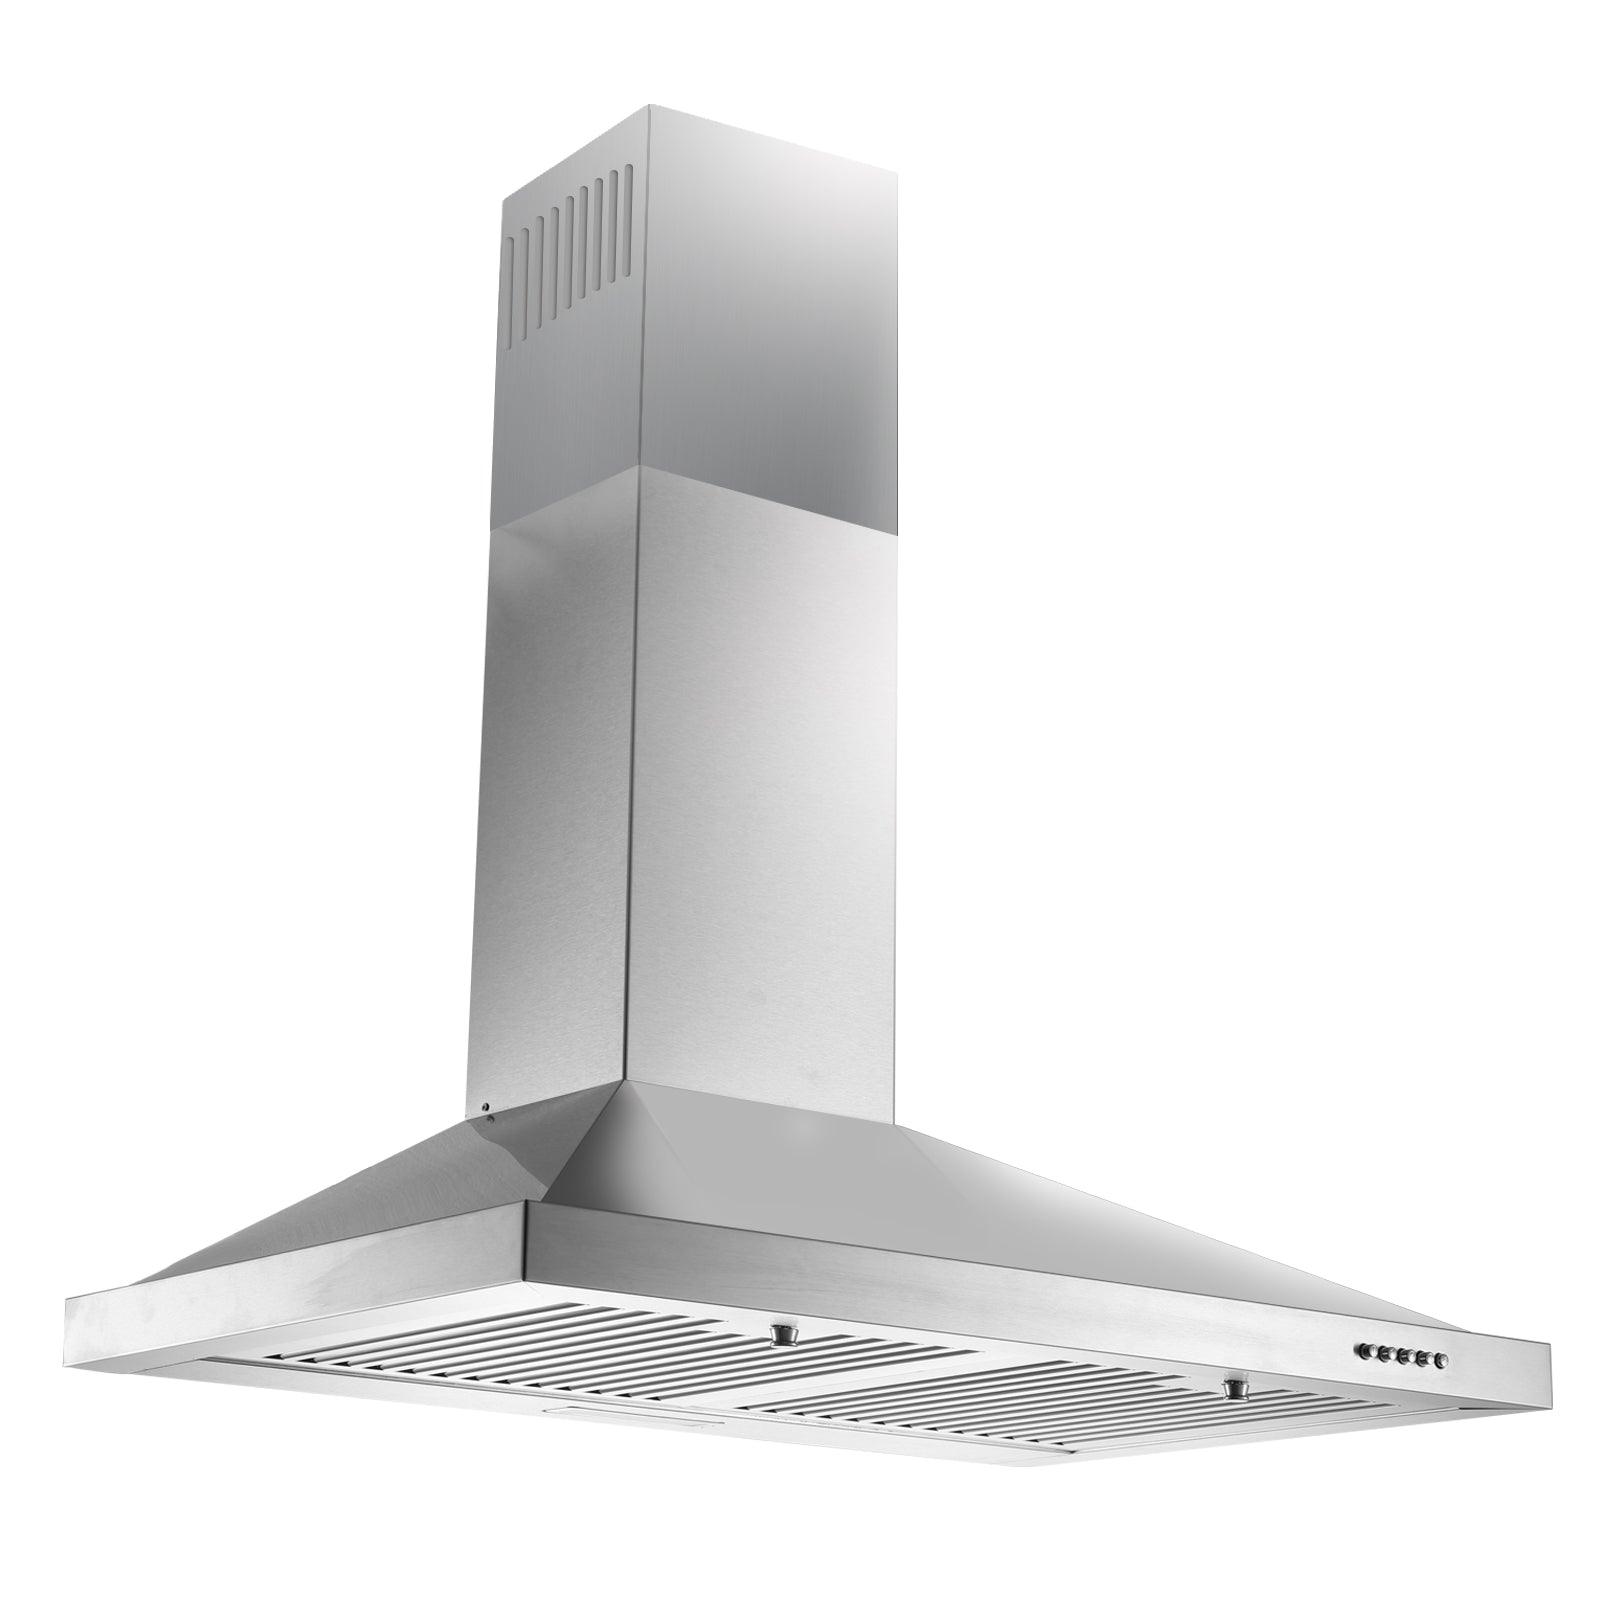 24 Inch Wall Mount Range Hood 450 CFM Ducted/Ductless with 3 Speed Exhaust Fan